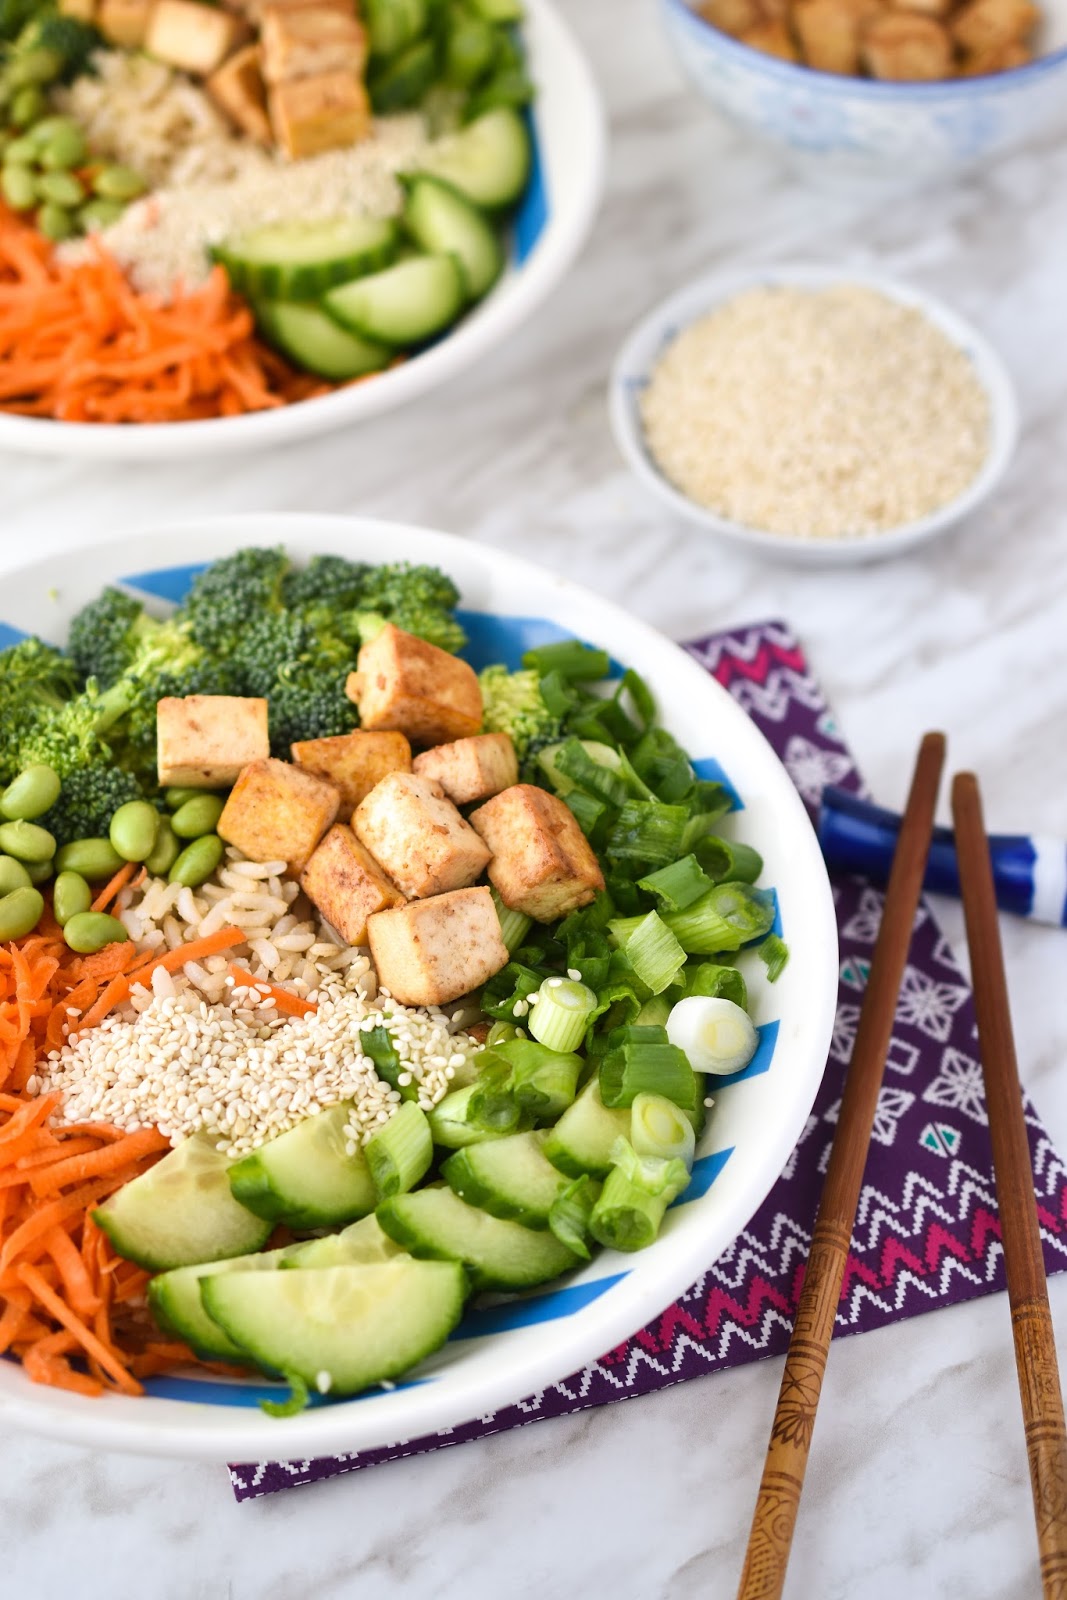 White bowl with cucumber slices, matchstick carrots, scallion, broccoli, crispy tofu cubes, edamame beans, and sesame seeds.